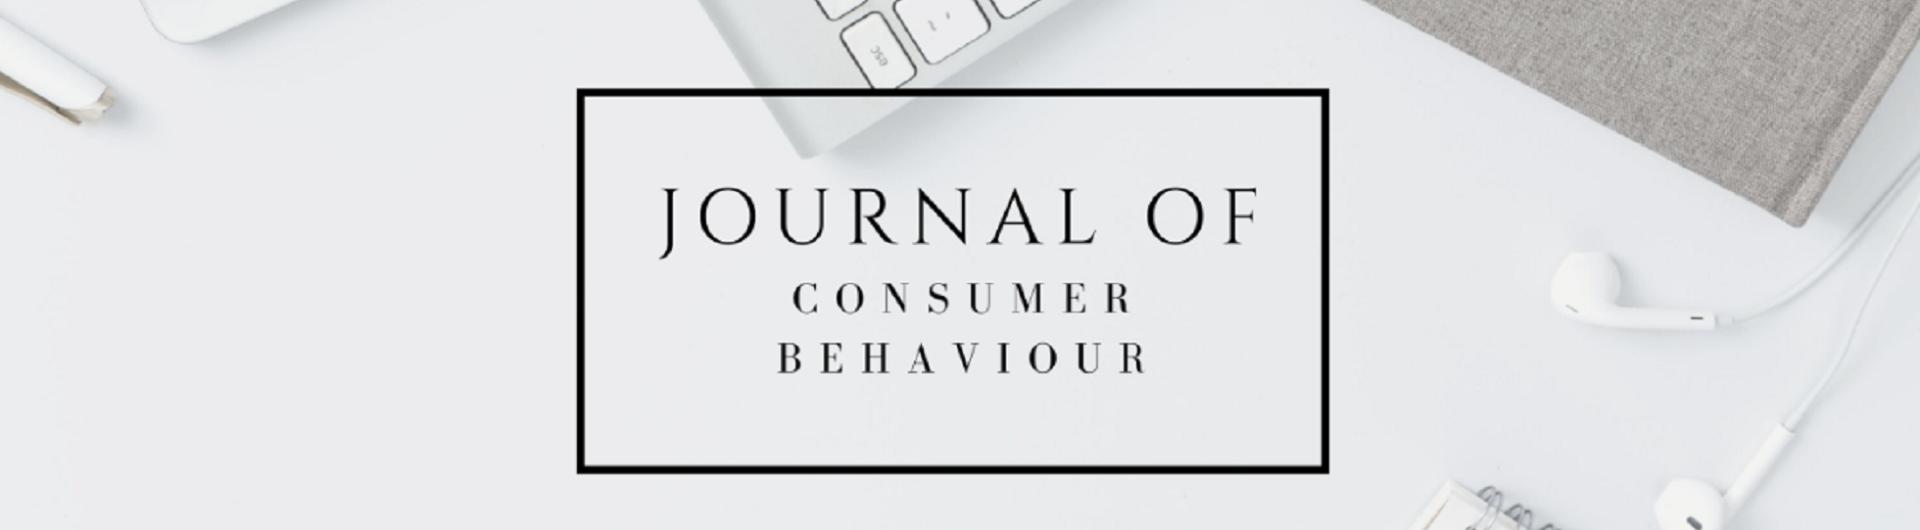 COB Journal of Consumer Behavior 2019 Lay Theories and Consumer perceptions of dietary supplements